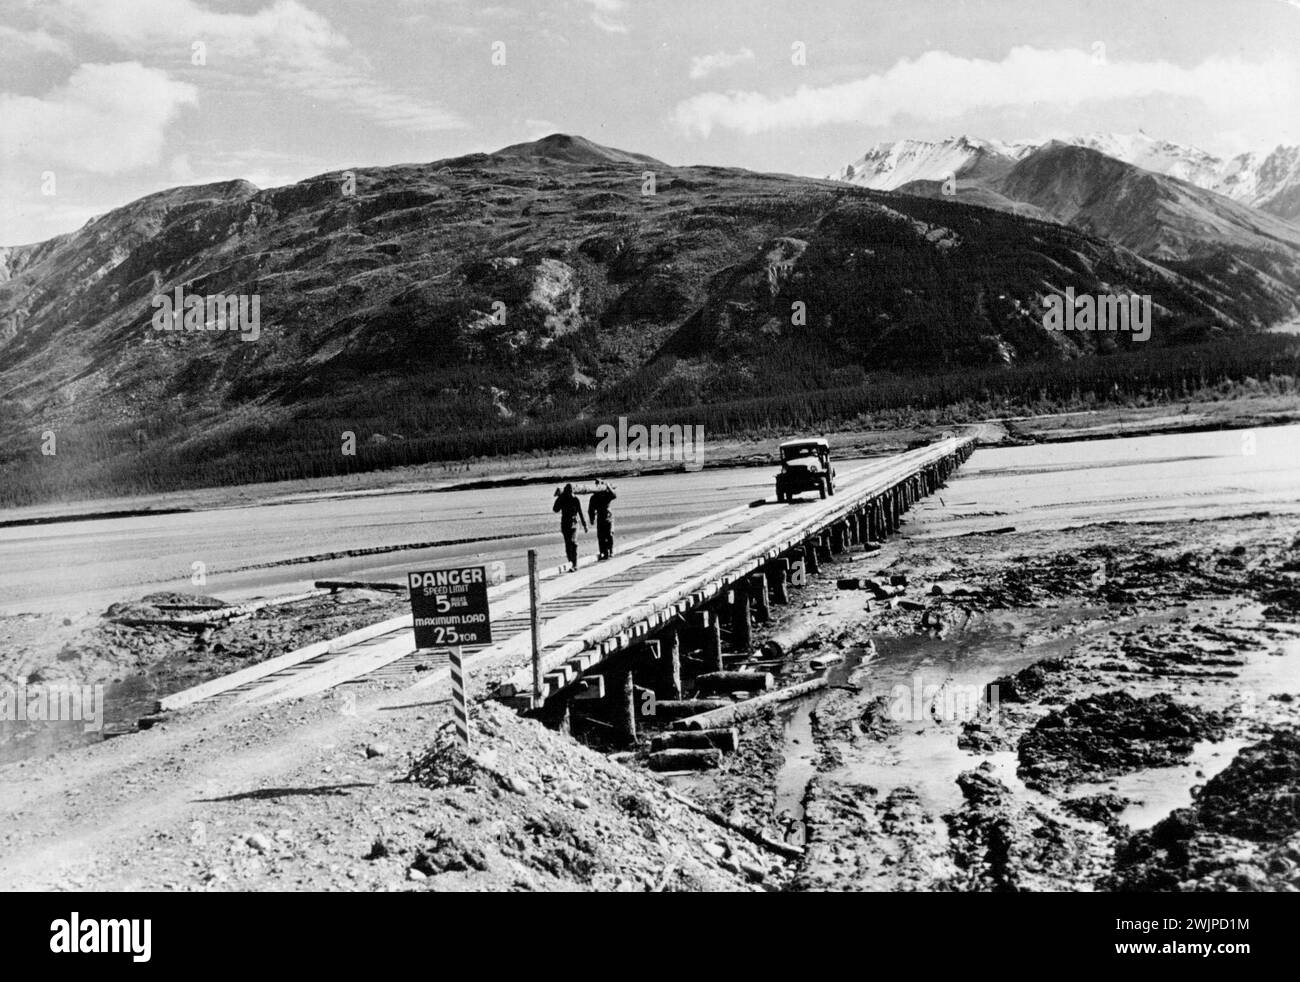 U.S. Highway To Alaska -- U.S. Army engineers built this permanent wooden bridge in three weeks as part of the Alcan Highway linking the U.S. and Alaska. The timber for the bridge was cut from the virgin forests through which the highway was routed. May 01, 1950. Stock Photo